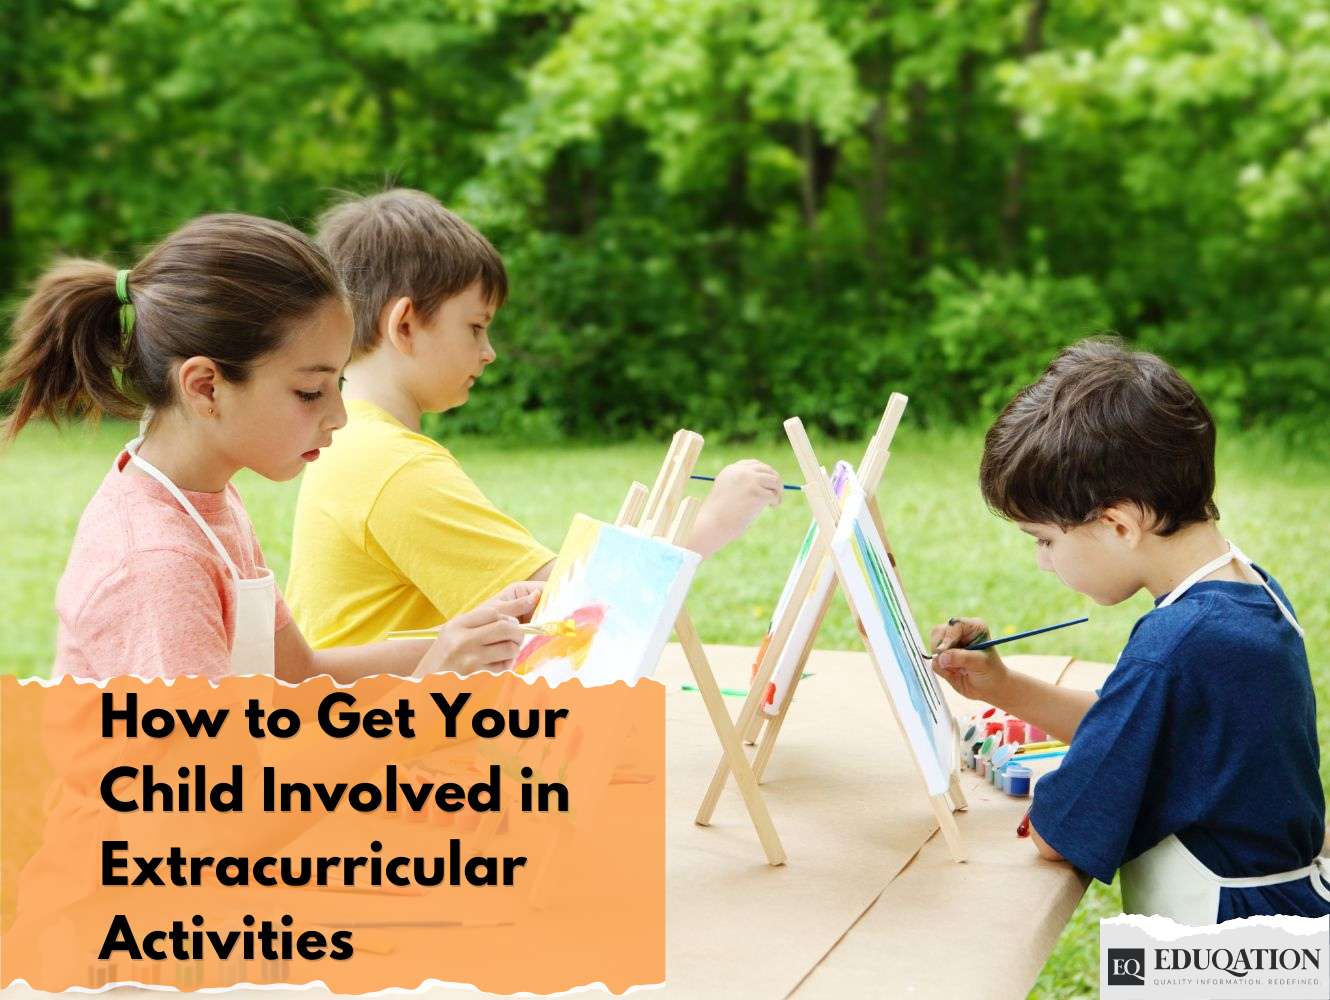 Extracurricular Activities for your child